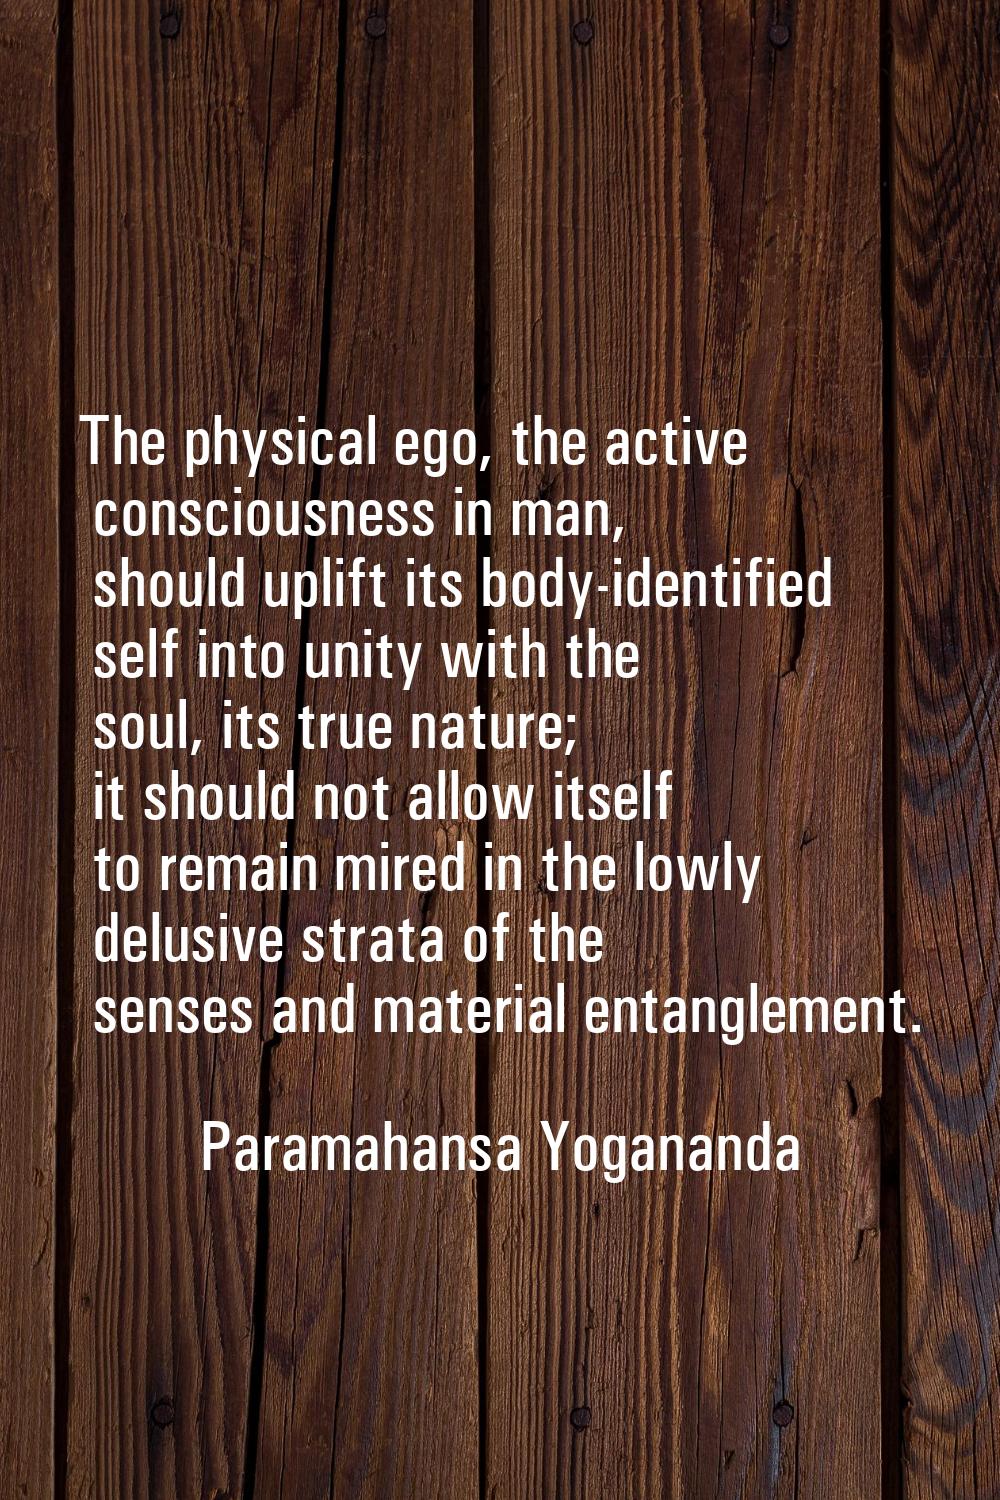 The physical ego, the active consciousness in man, should uplift its body-identified self into unit